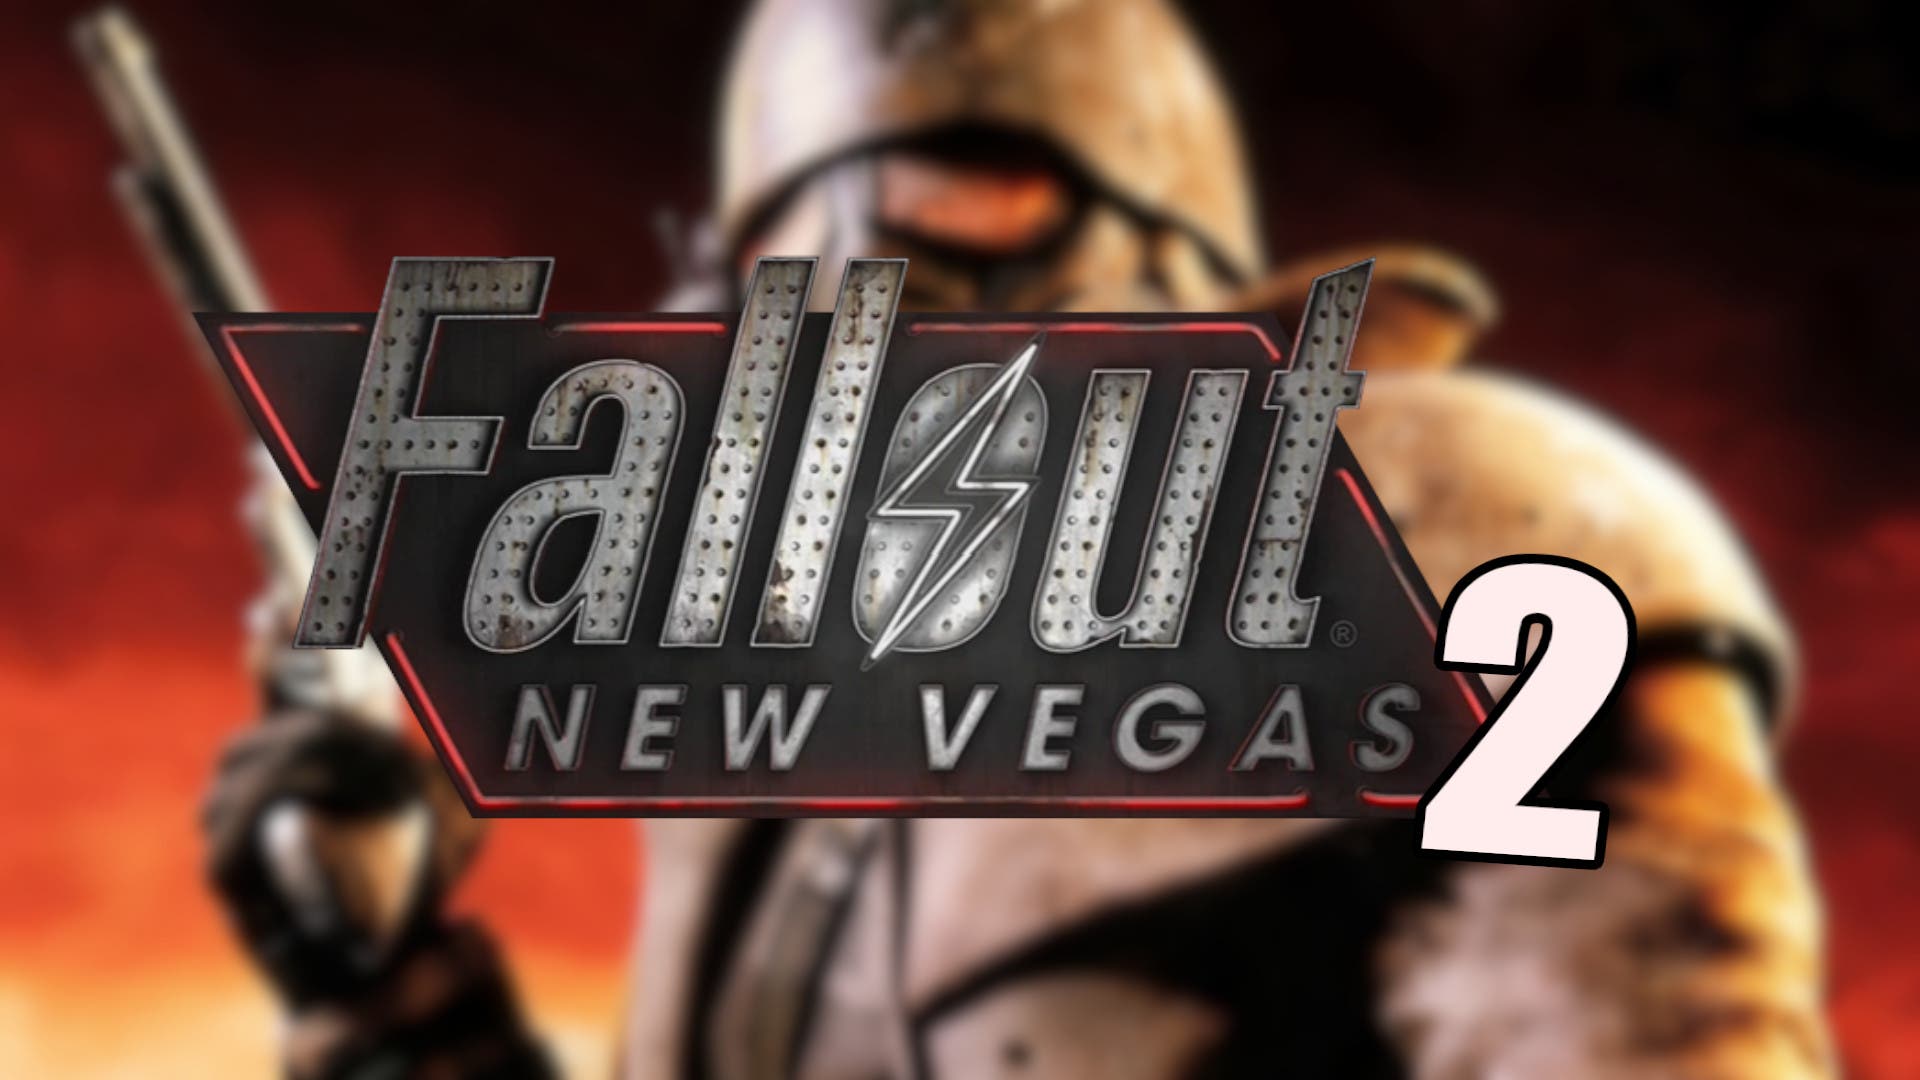 Fallout New Vegas 2 could already be in the works, according to a leaked clue on Steam